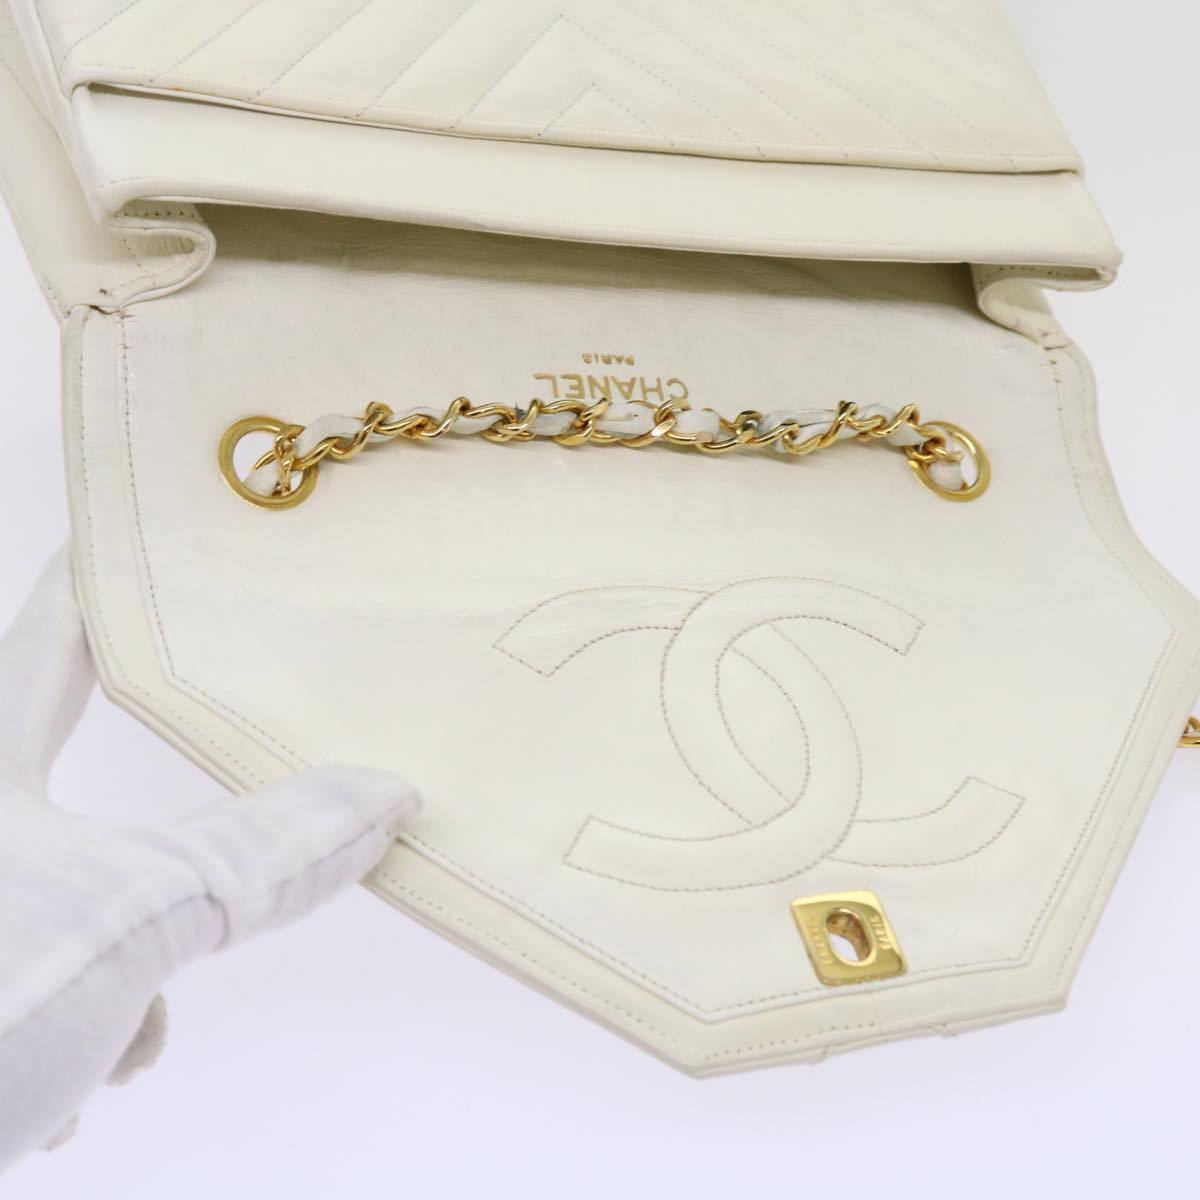 CHANEL Turn Lock Chain V Stitch Shoulder Bag Leather White CC Auth bs13035